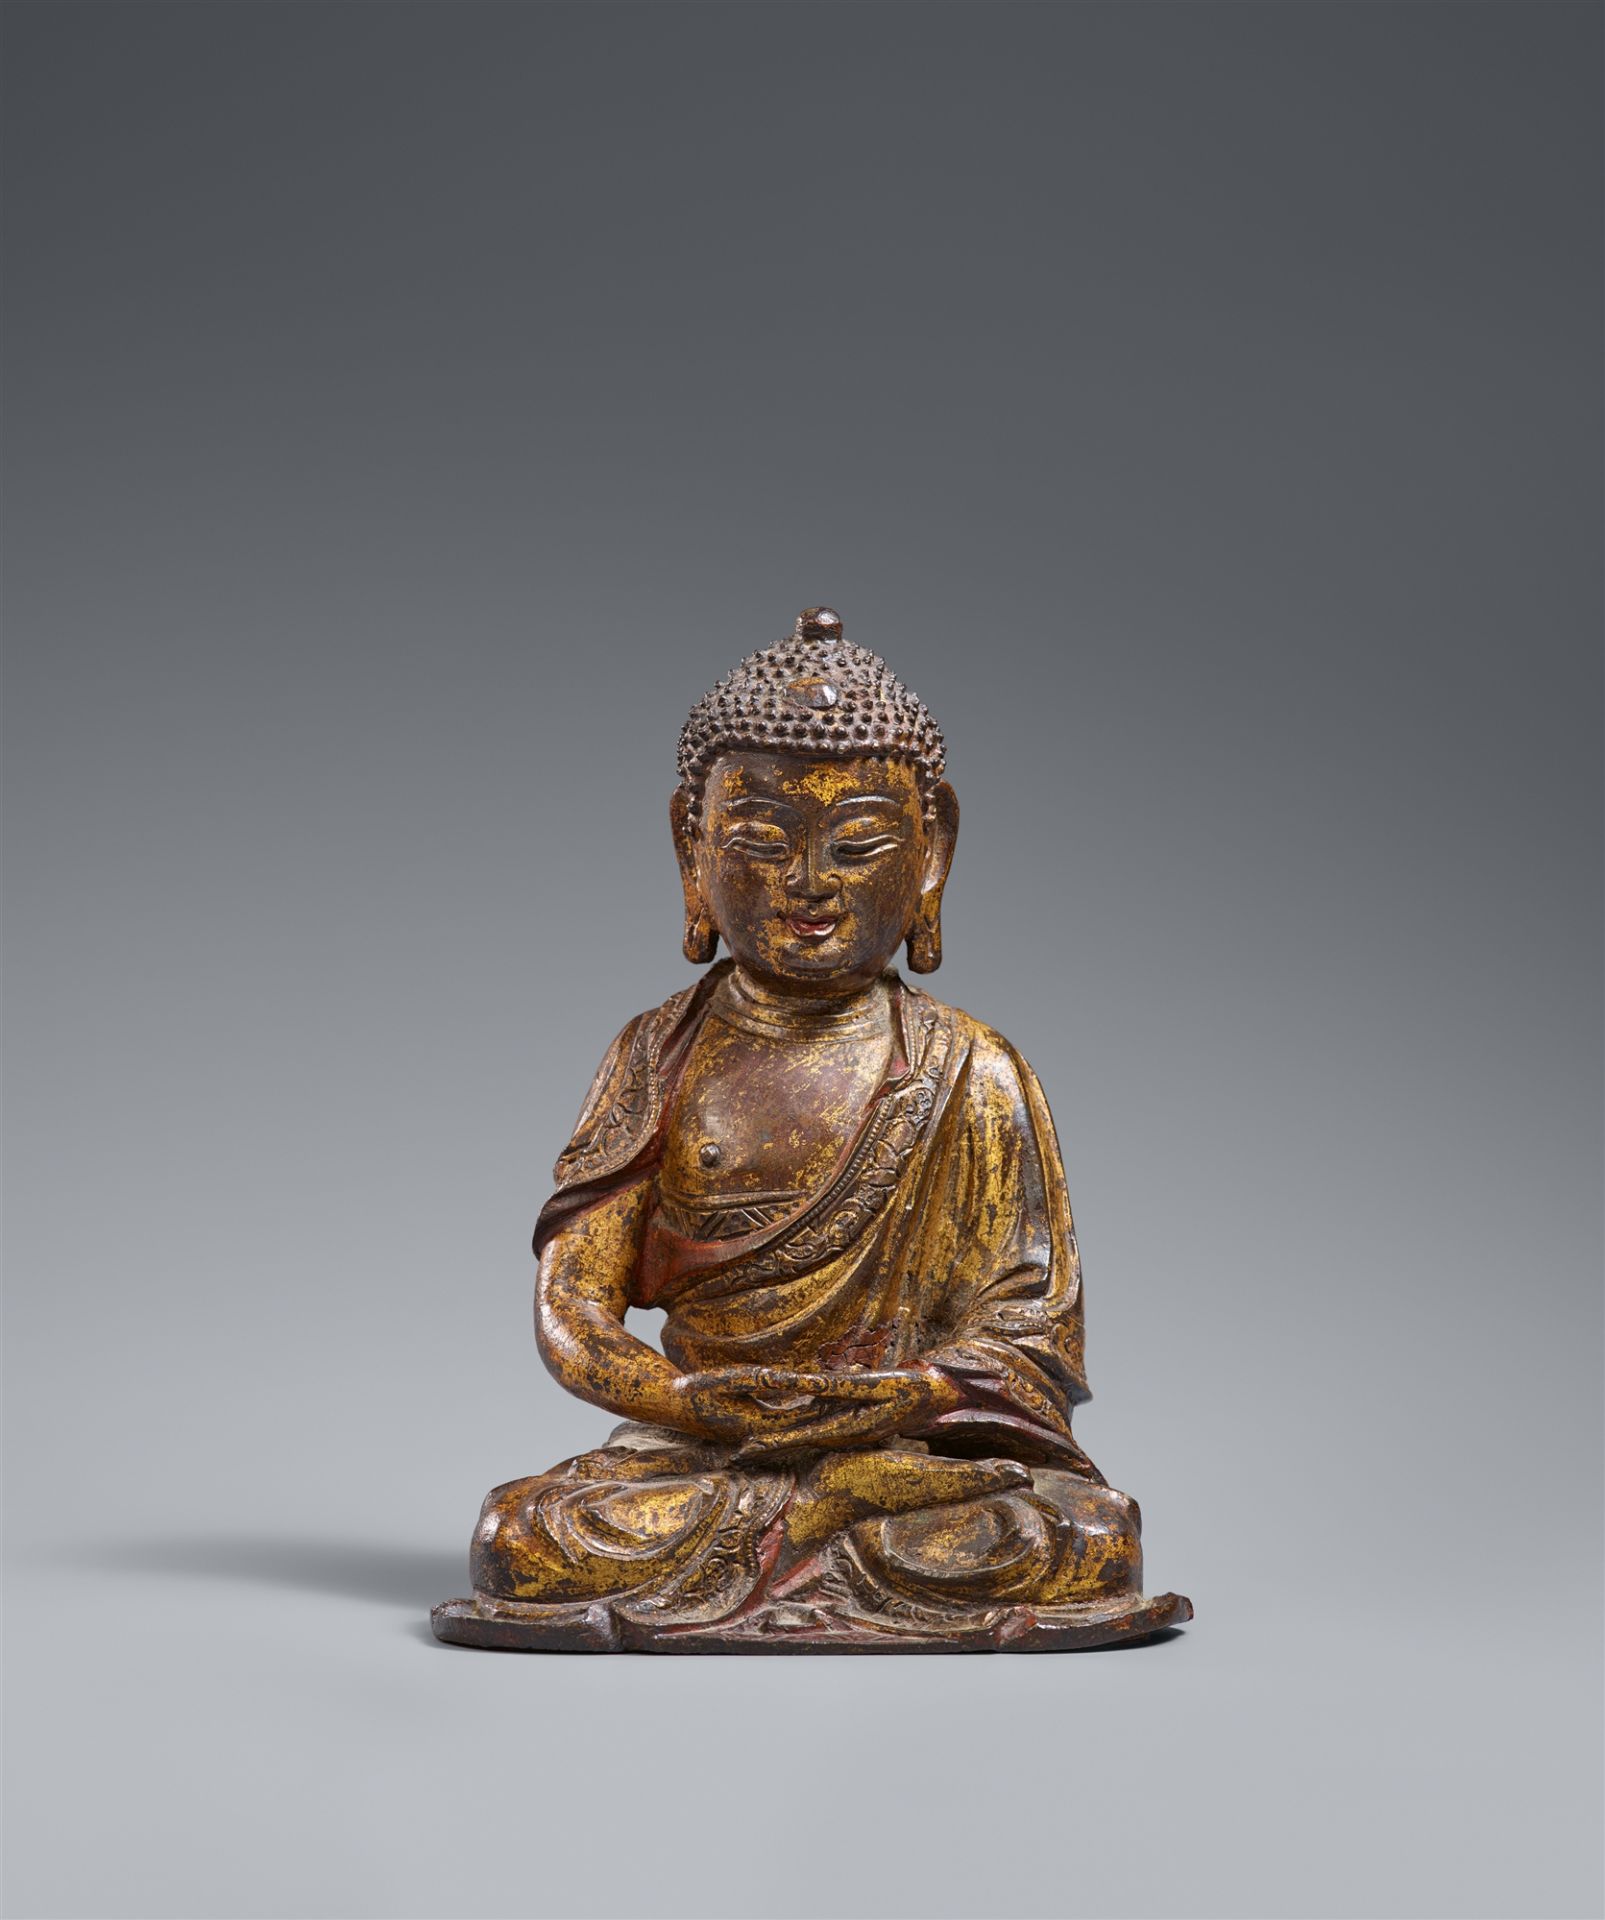 A small gilded and lacquered bronze figure of Buddha Shakyamuni. Ming dynasty, 16th century